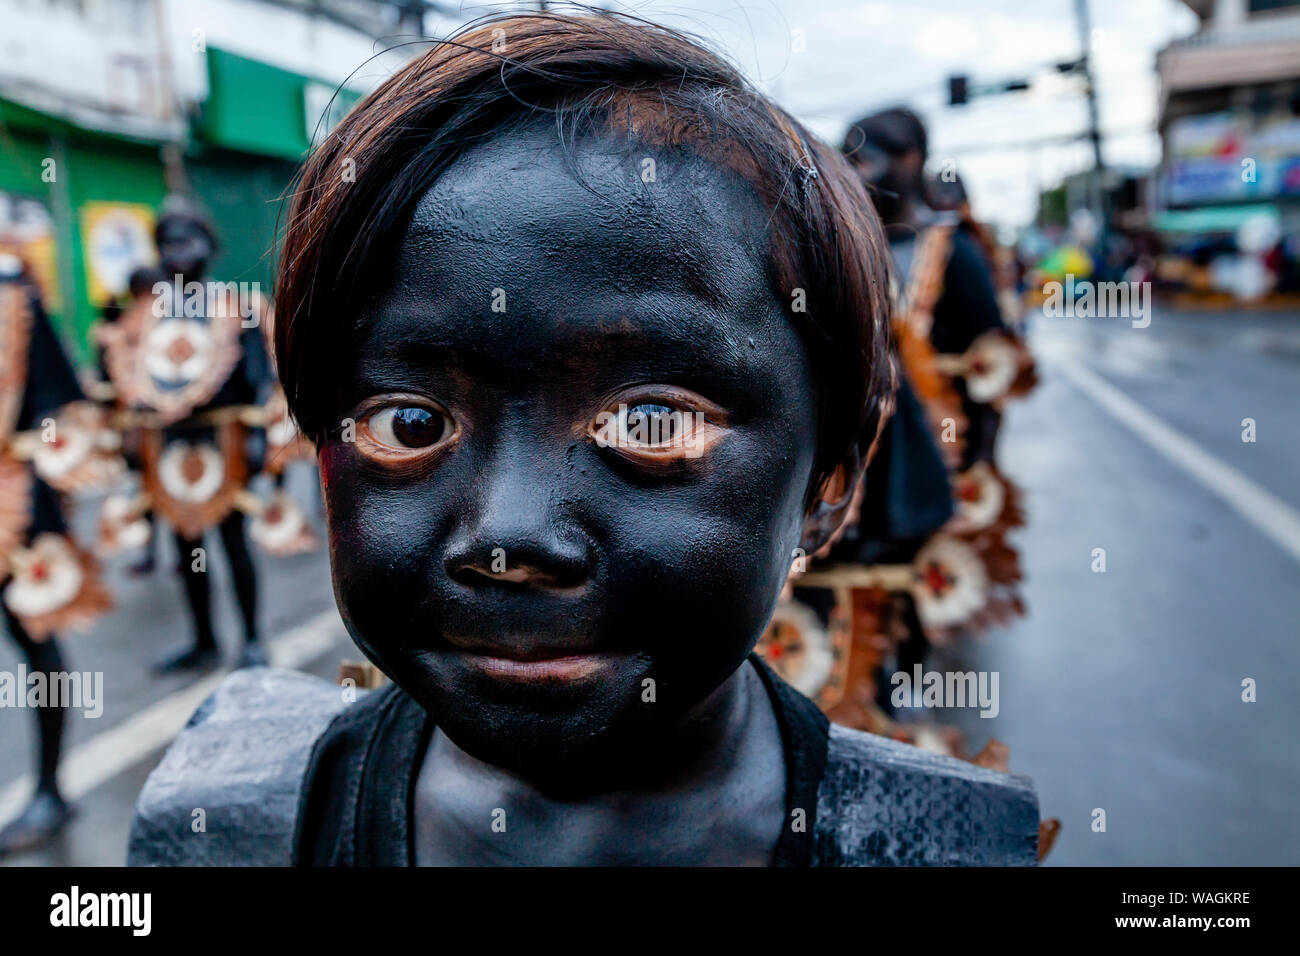 A Filipino Child Takes Part In A Children’s Parade During The Ati-Atihan Festival, Kalibo, Panay Island, Aklan Province, The Philippines Stock Photo